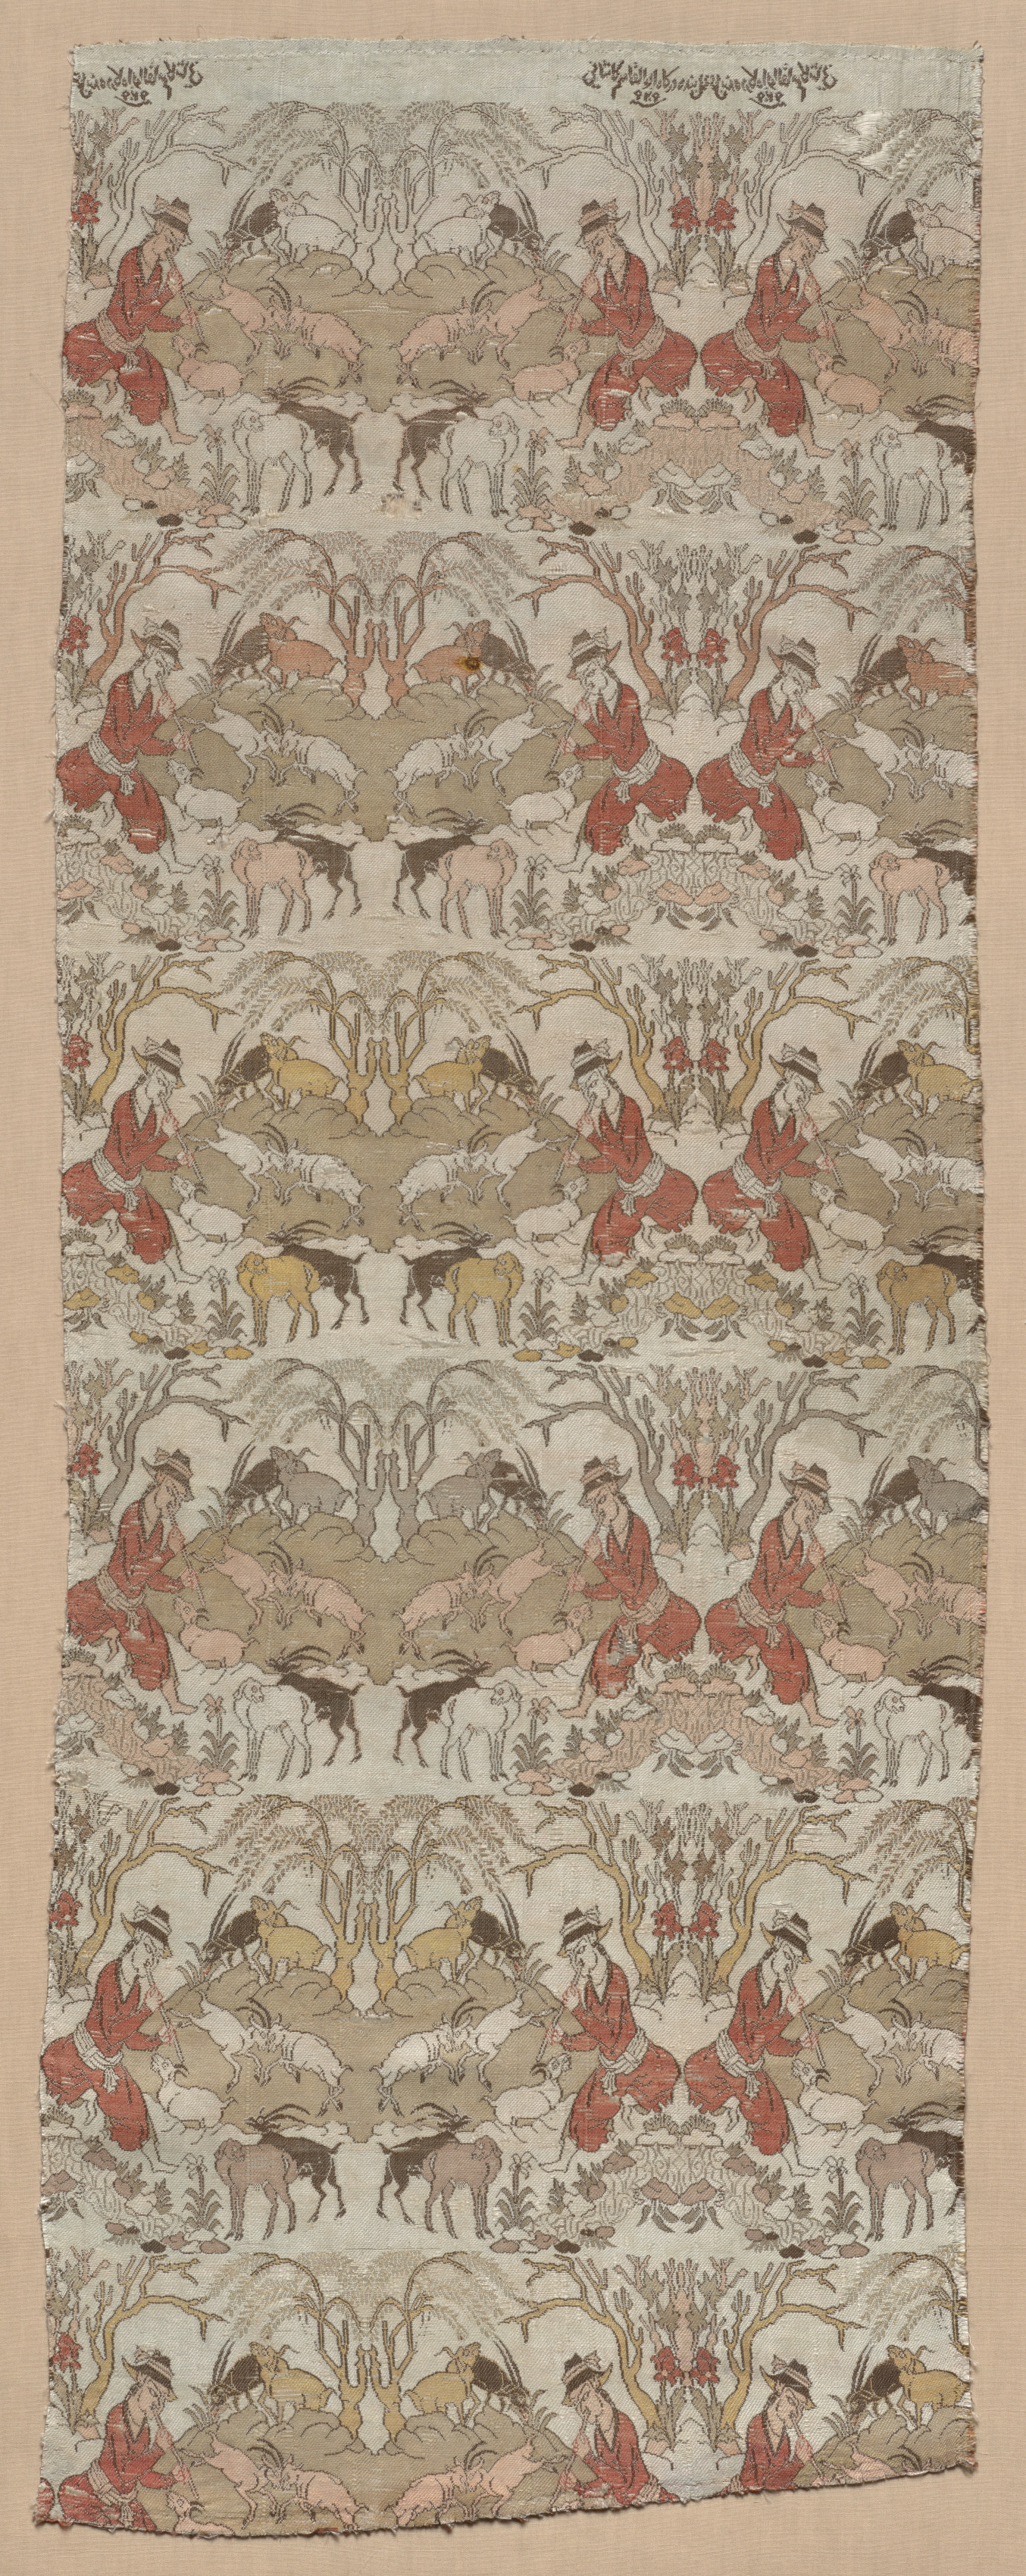 Silk Textile with Goatherds in a Landscape